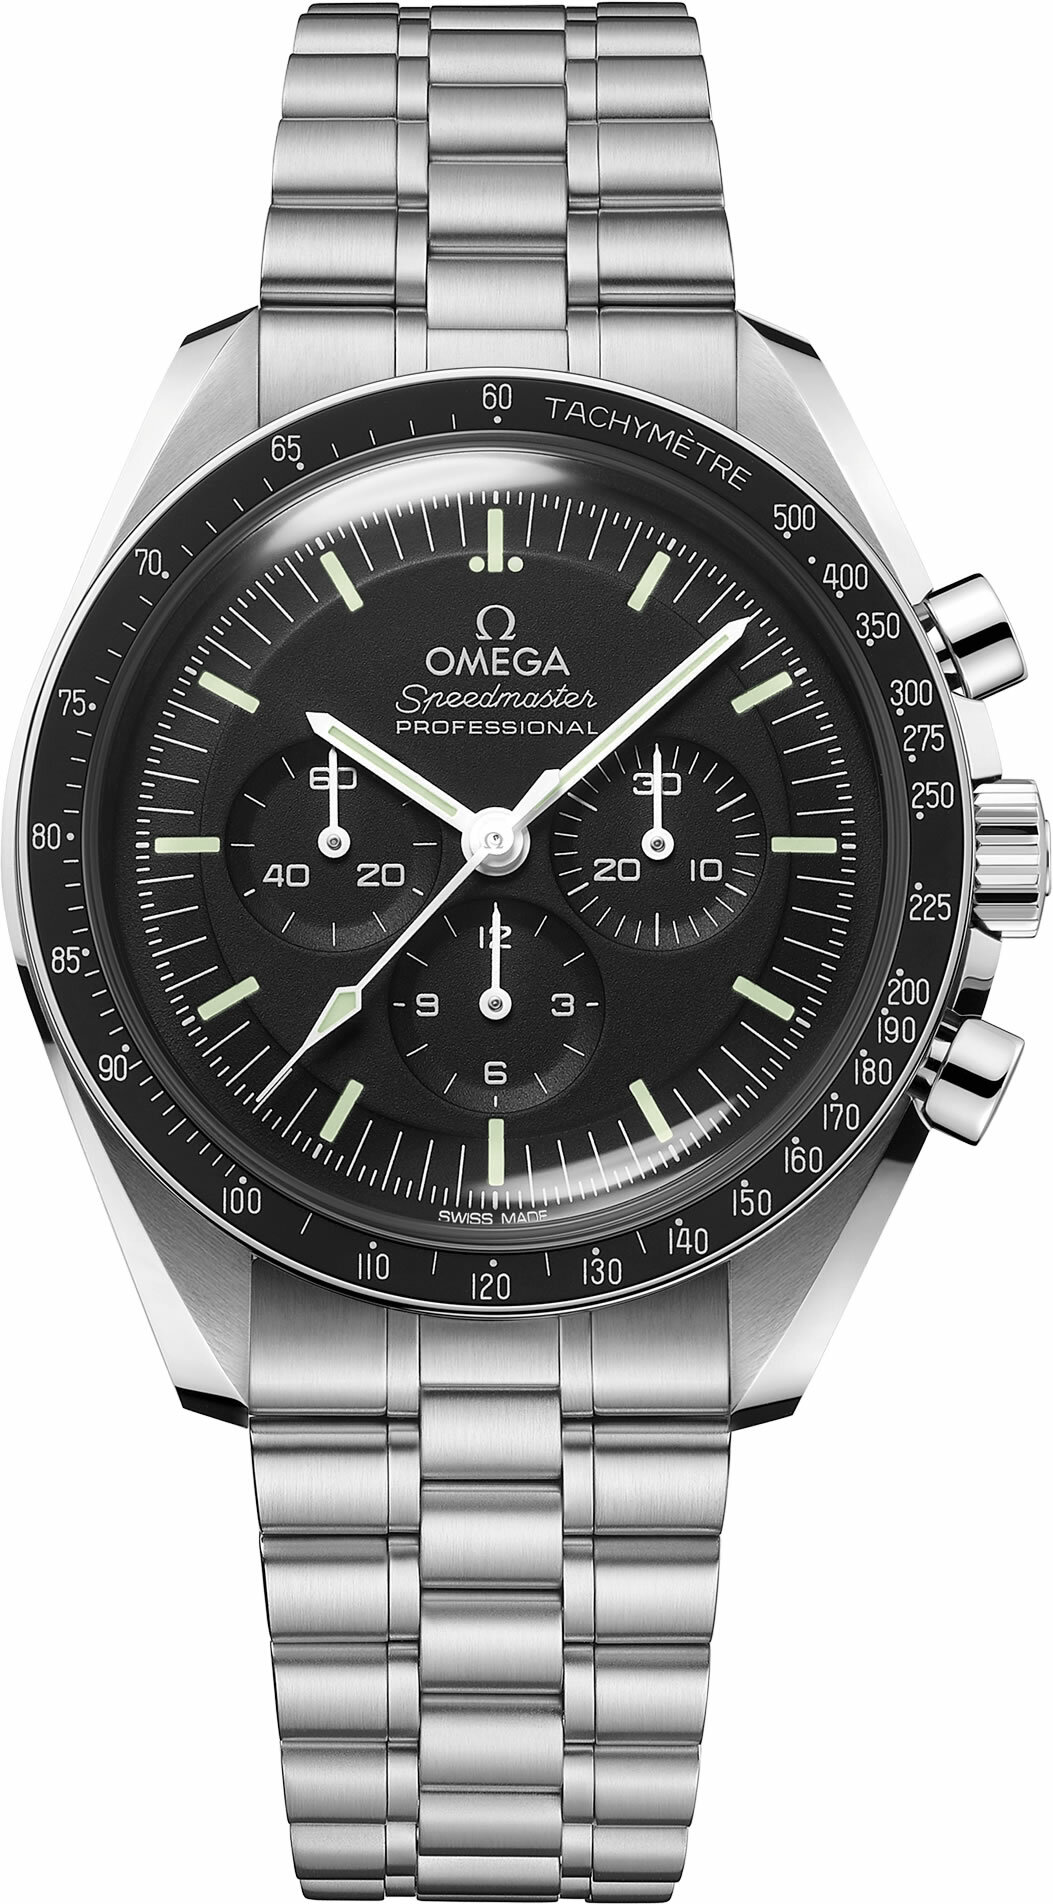 Details: The 2021 Omega Speedmaster Professional ref. 310.30.42.50.01.001 -  THE COLLECTIVE